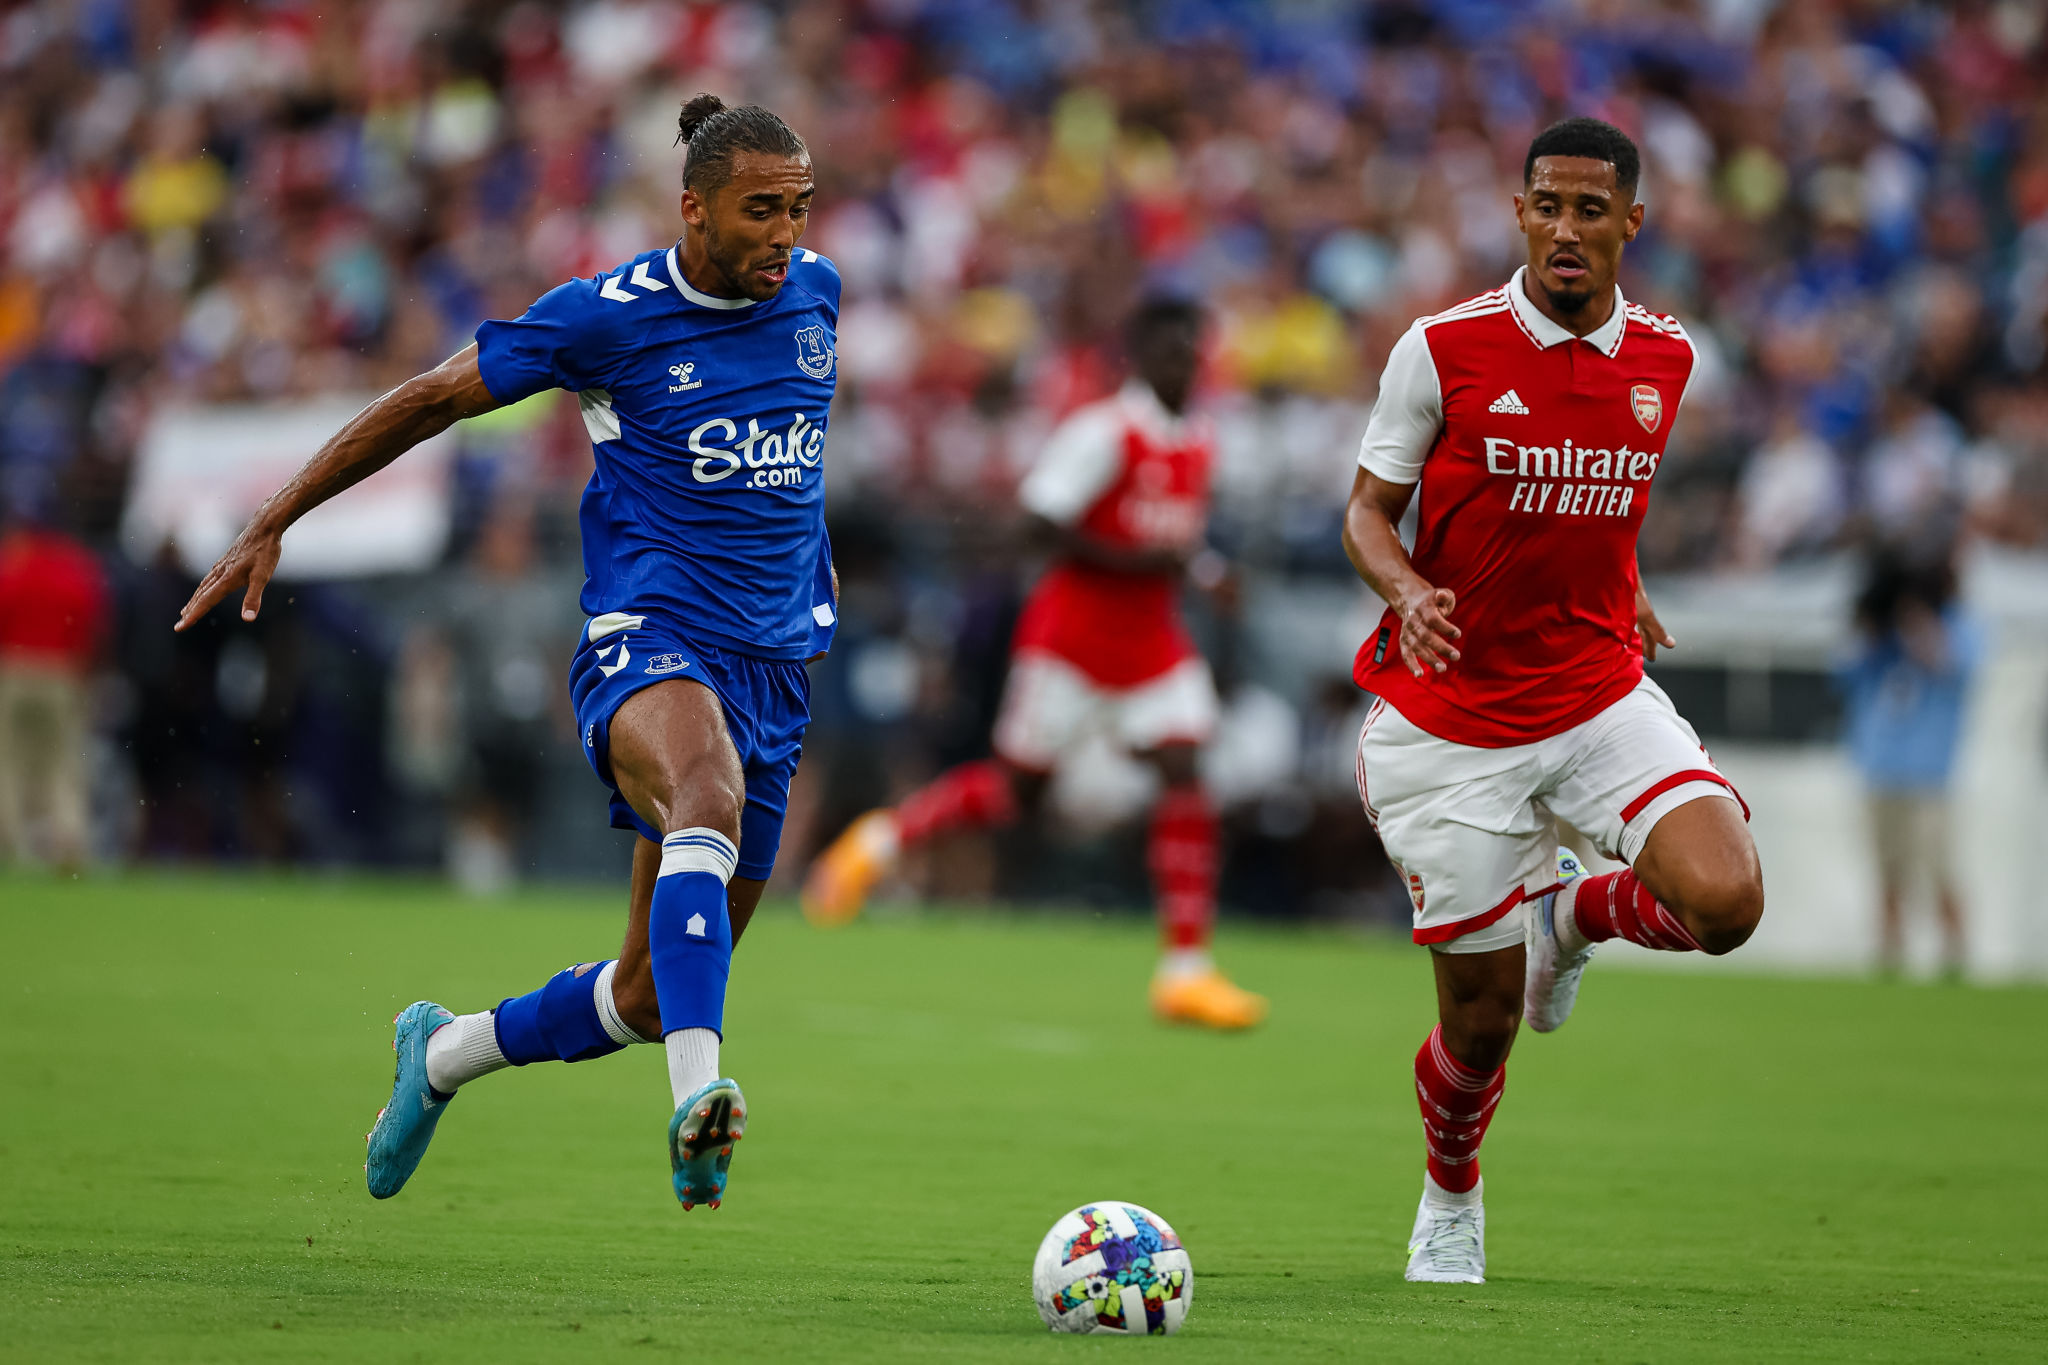 Arsenal vs Everton: FT - ARS 2-0 EVE, Arsenal win Pre-Season Friendly against Everton, Goals from Jesus and Saka seal victory, Check Arsenal beat Everton HIGHLIGHTS